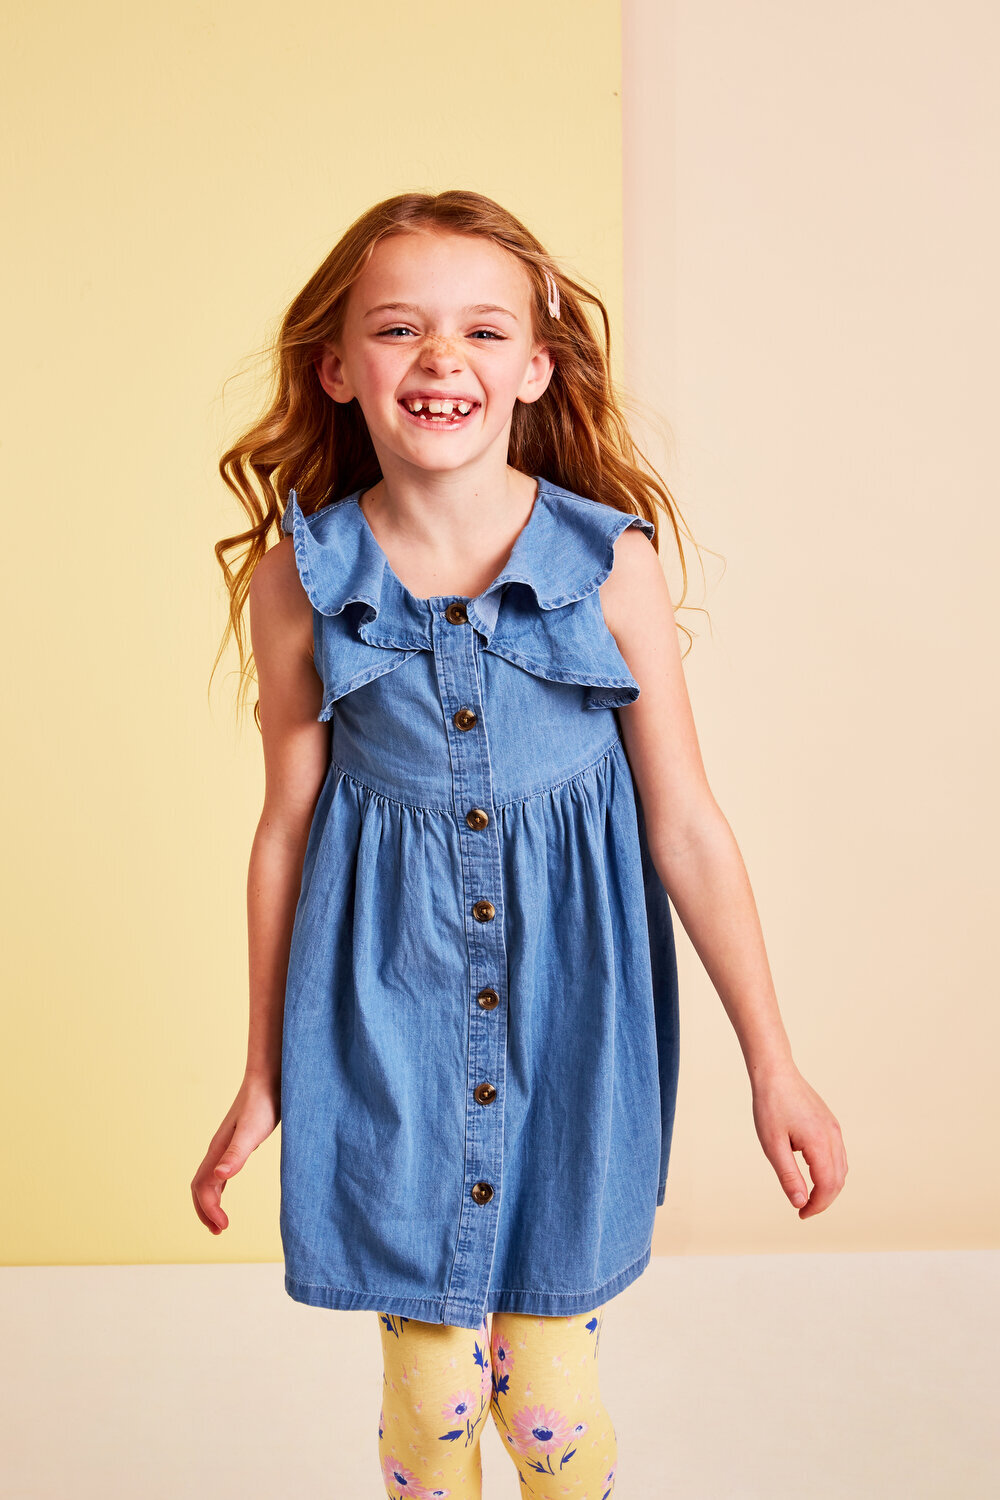 Greer Rivera Photography Kids Editorial Photoshoots Marin  Girl smiling in a dress